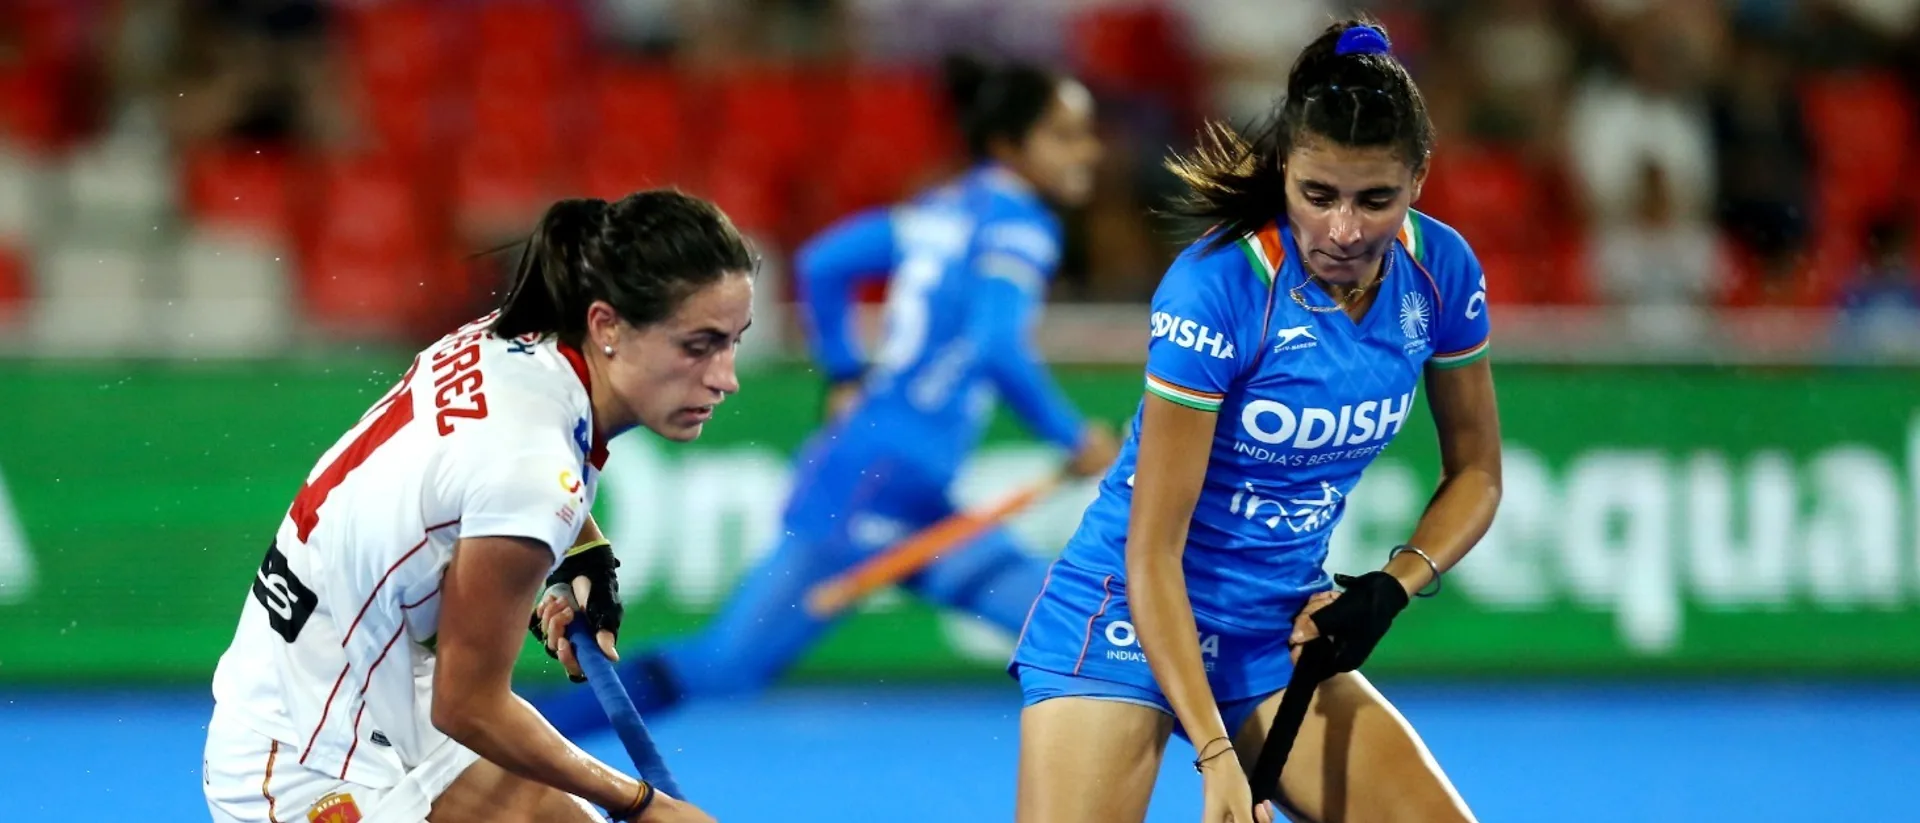 Hockey Women's World Cup 2022 | India lose 0-1 to Spain in must-win game, out of quarters race